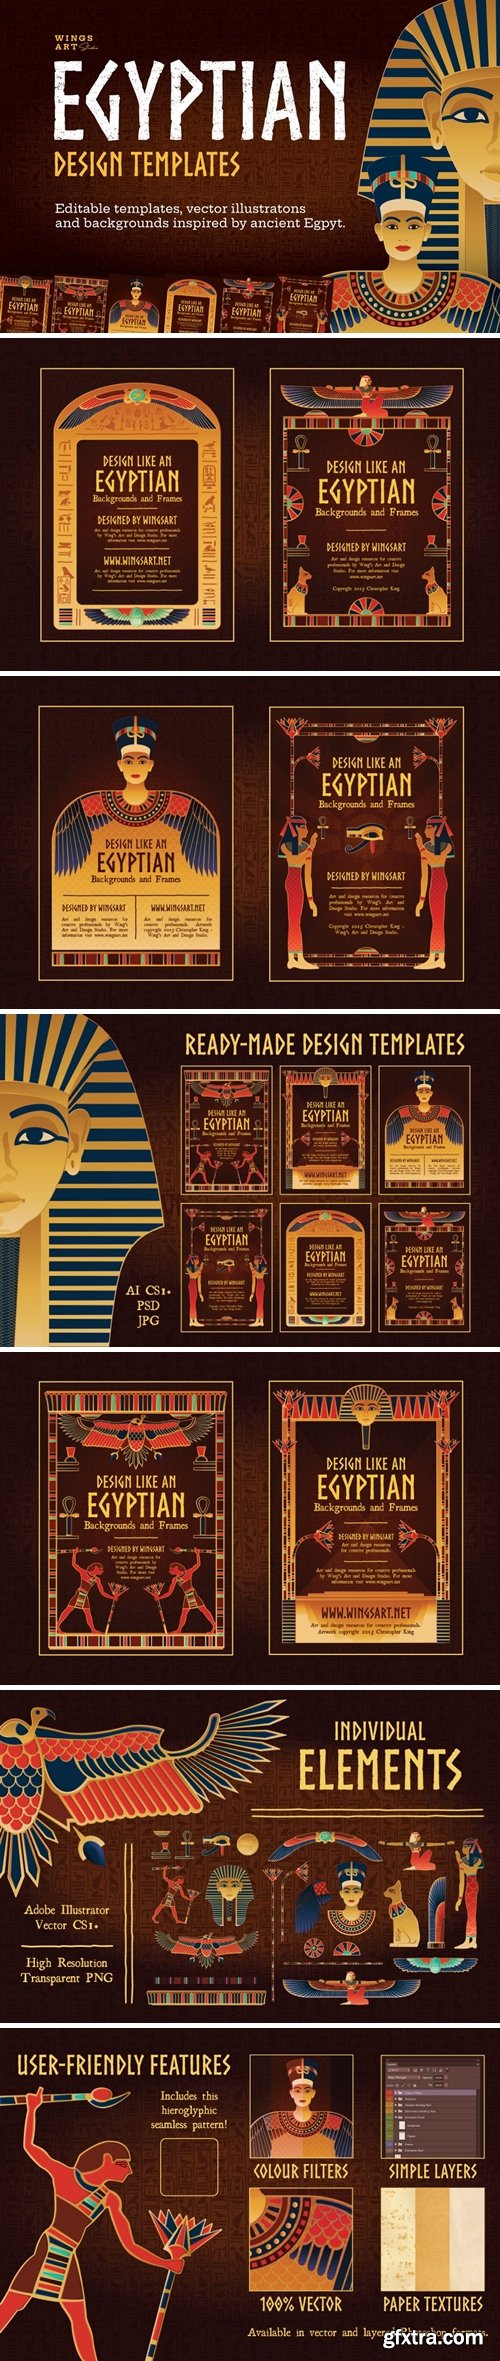 Egyptian Illustrations and Poster Templates